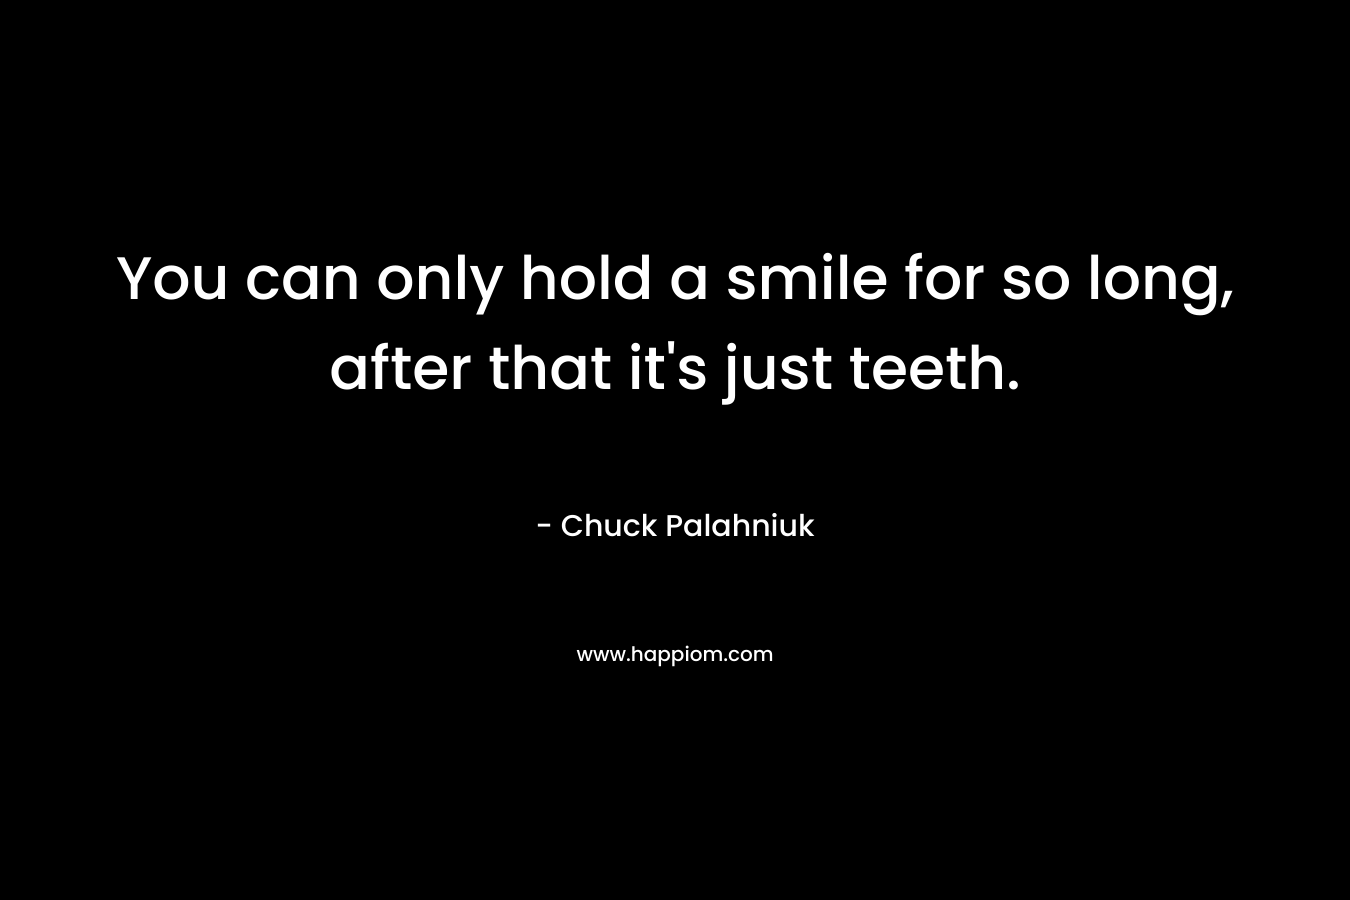 You can only hold a smile for so long, after that it’s just teeth. – Chuck Palahniuk